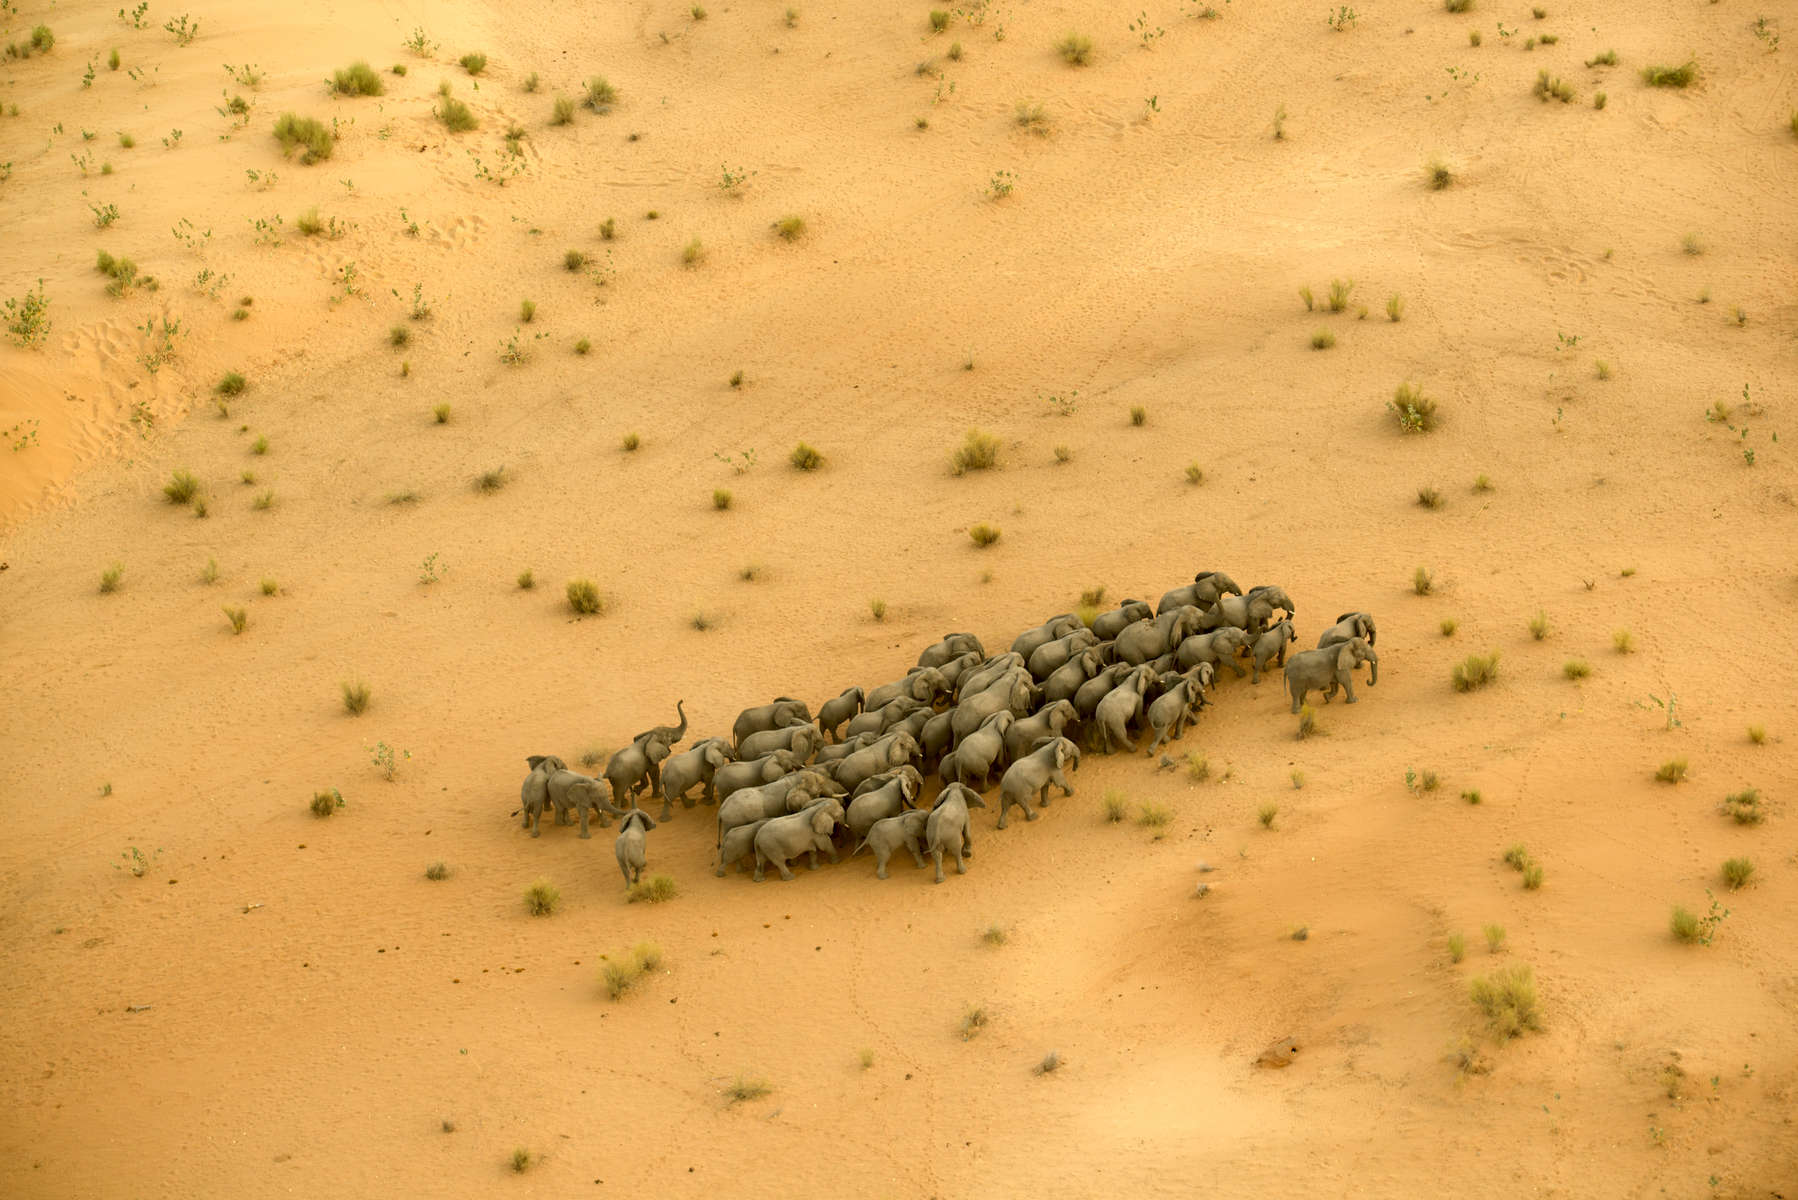 A dwindling elephant population inhabits the fringes of the desert and utilizes the vegetation found on the shores of the lake.